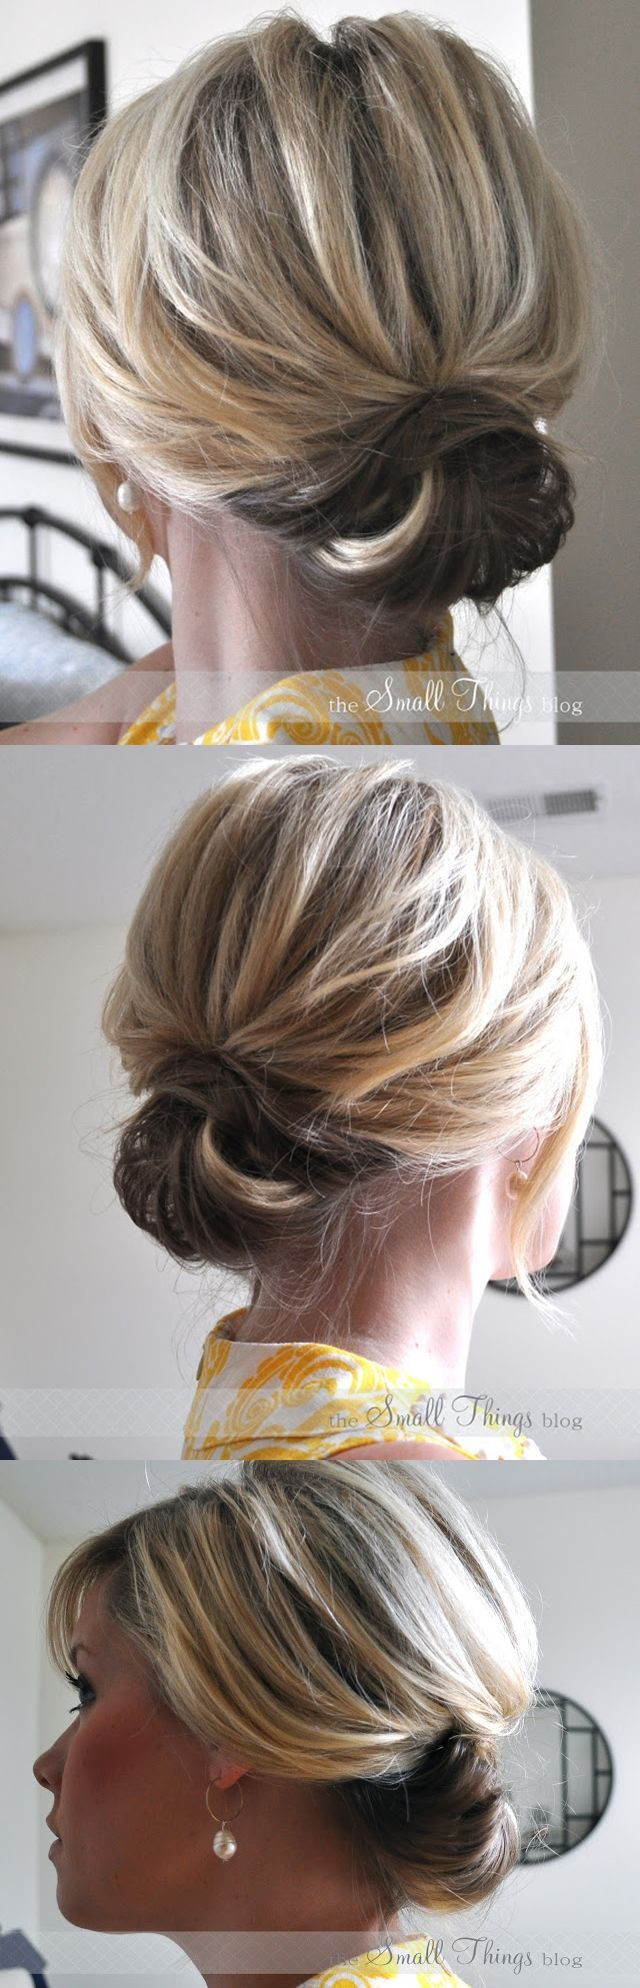 DIY Formal Hairstyles
 DIY Hairstyle Chic Up do for Short Hair